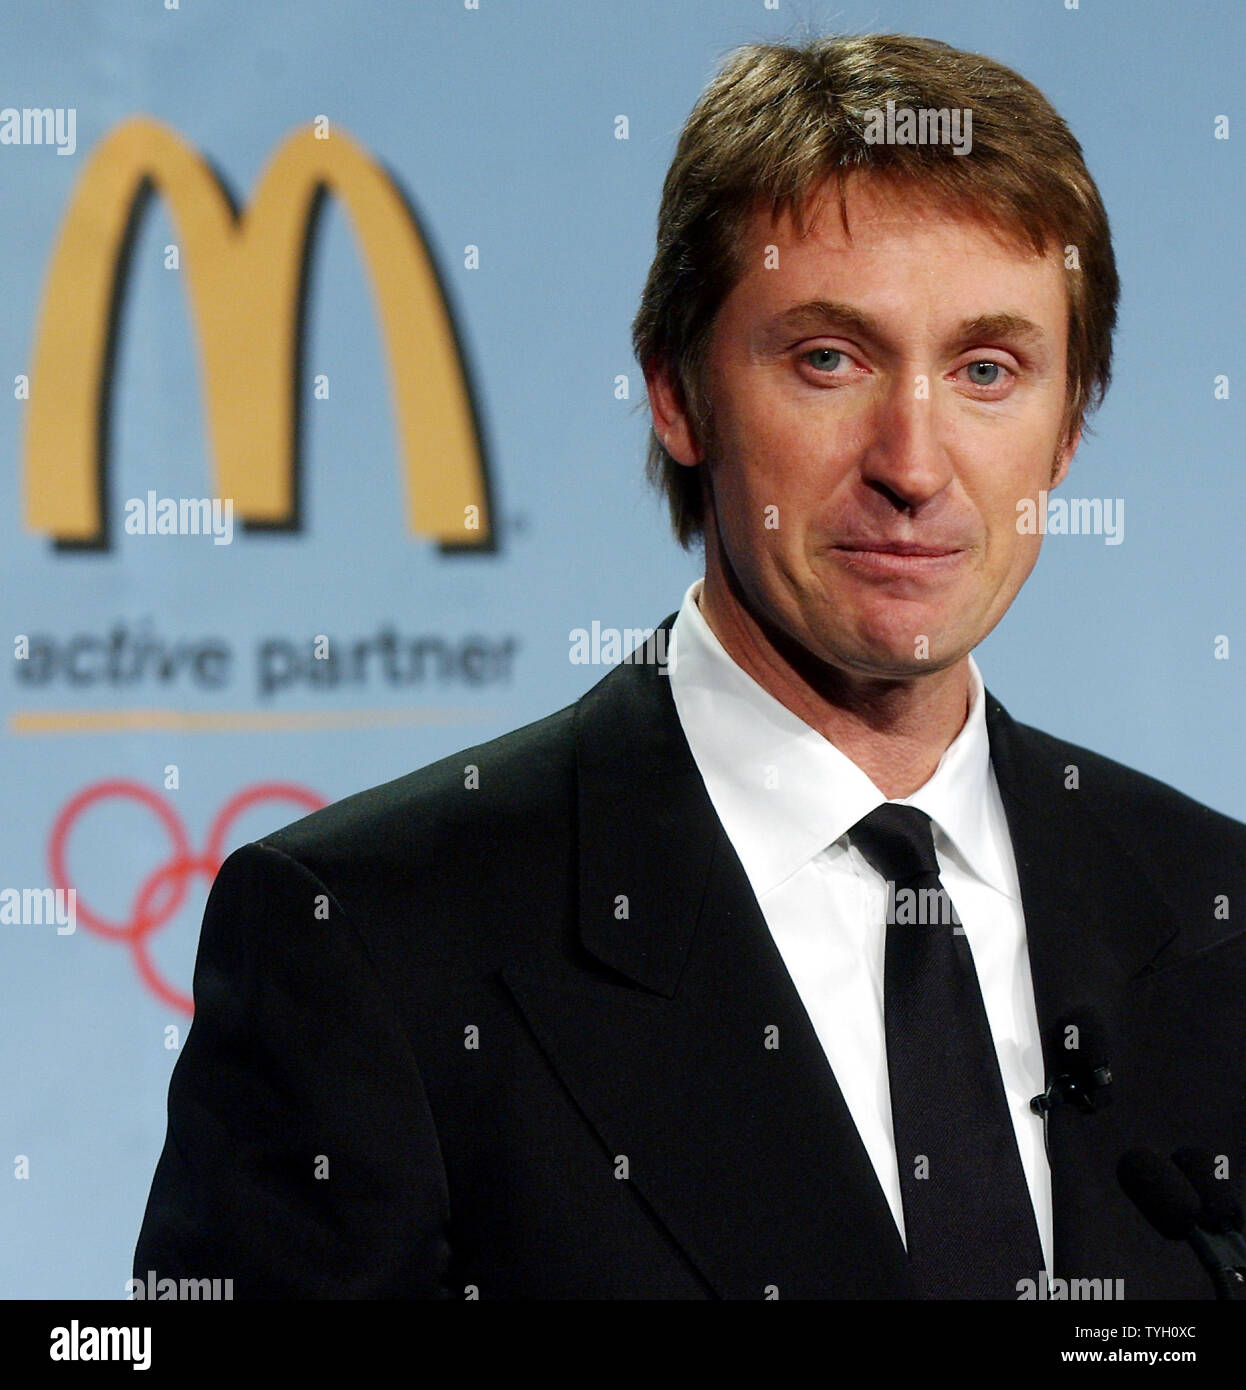 Hockey Hall of Fame player Wayne Gretzky takes part in the McDonald's New York promotional launch on March 8, 2005 of a multi faceted education campaign themed: 'it's what i eat and what i do...i'm lovin' it' to help consumers understand the important interplay between eating right and staying active.  (UPI Photo/Ezio Petersen) Stock Photo